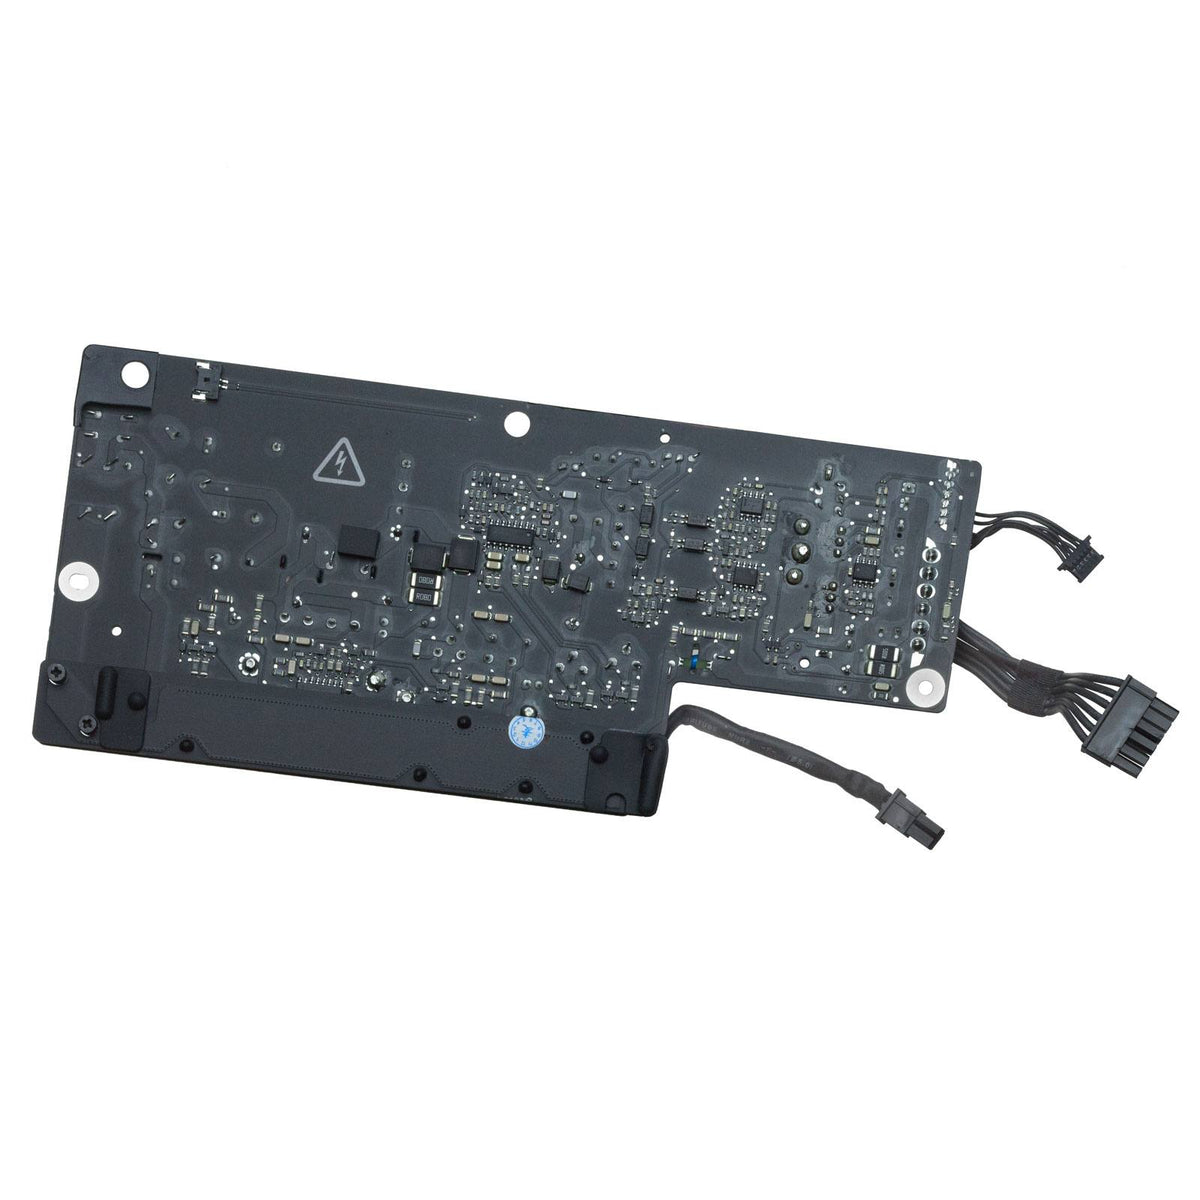 POWER SUPPLY (185W) FOR IMAC 21.5" A1418 (LATE 2012, LATE 2015)